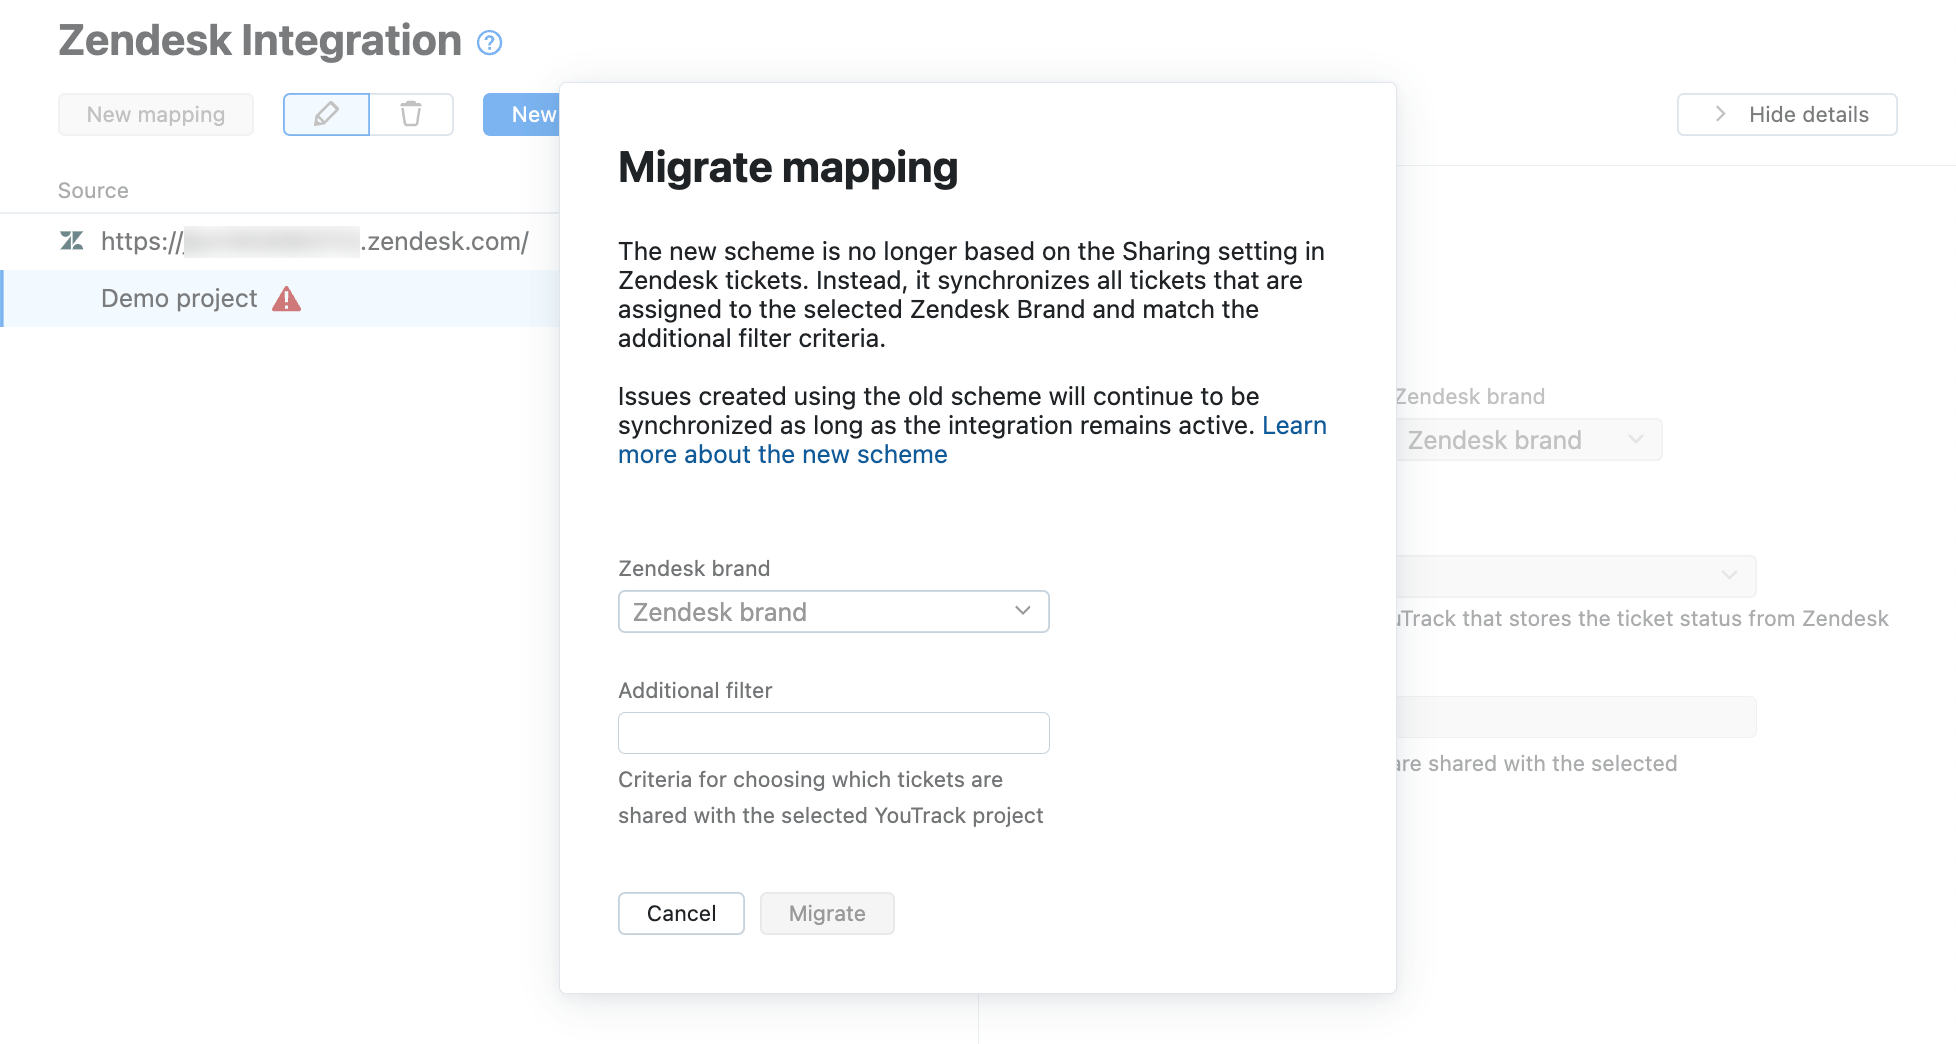 Migrate mapping dialog